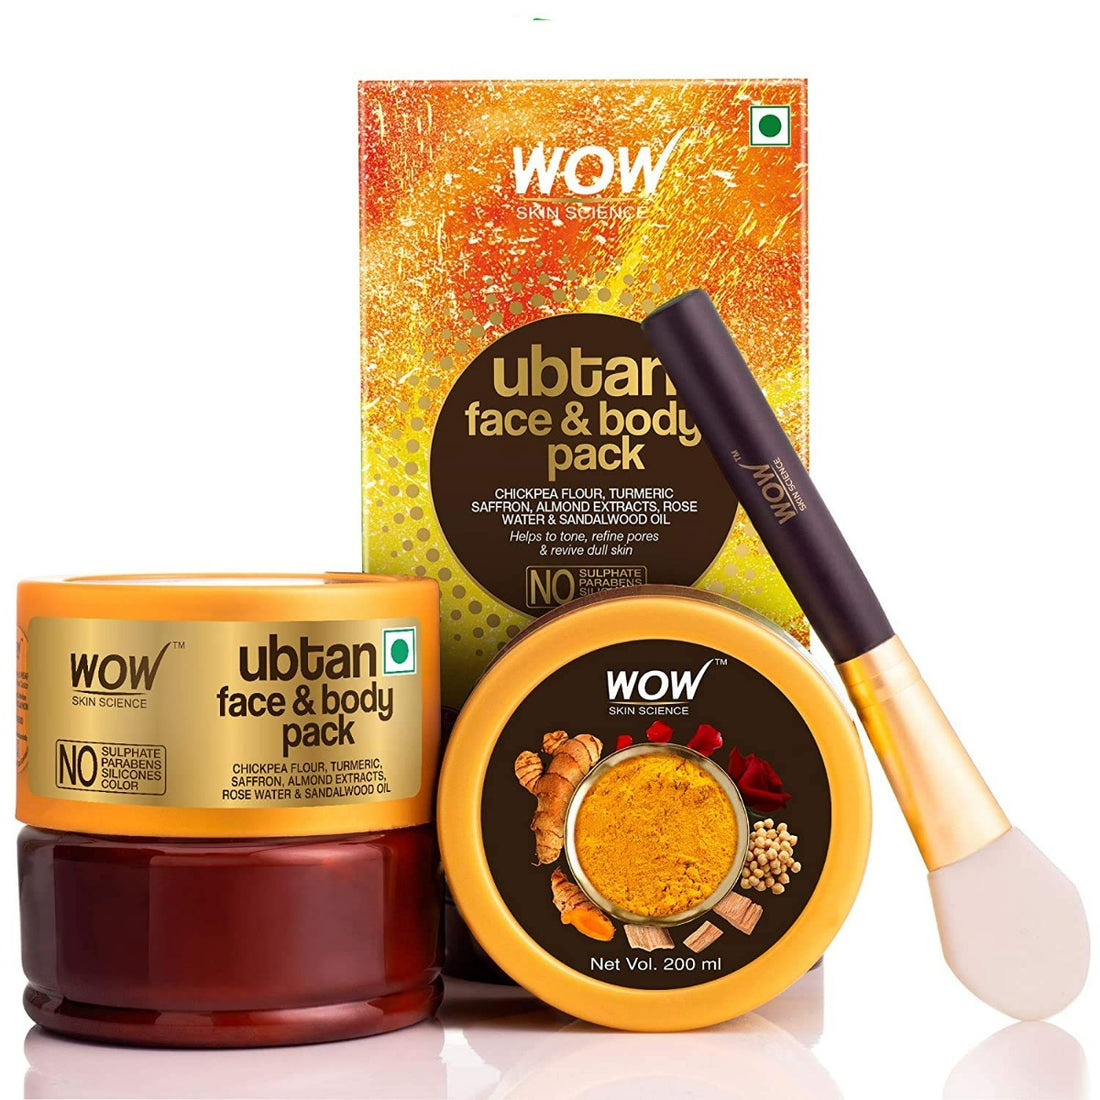 Wow Skin Science Ubtan Face and Body pack (200ml)